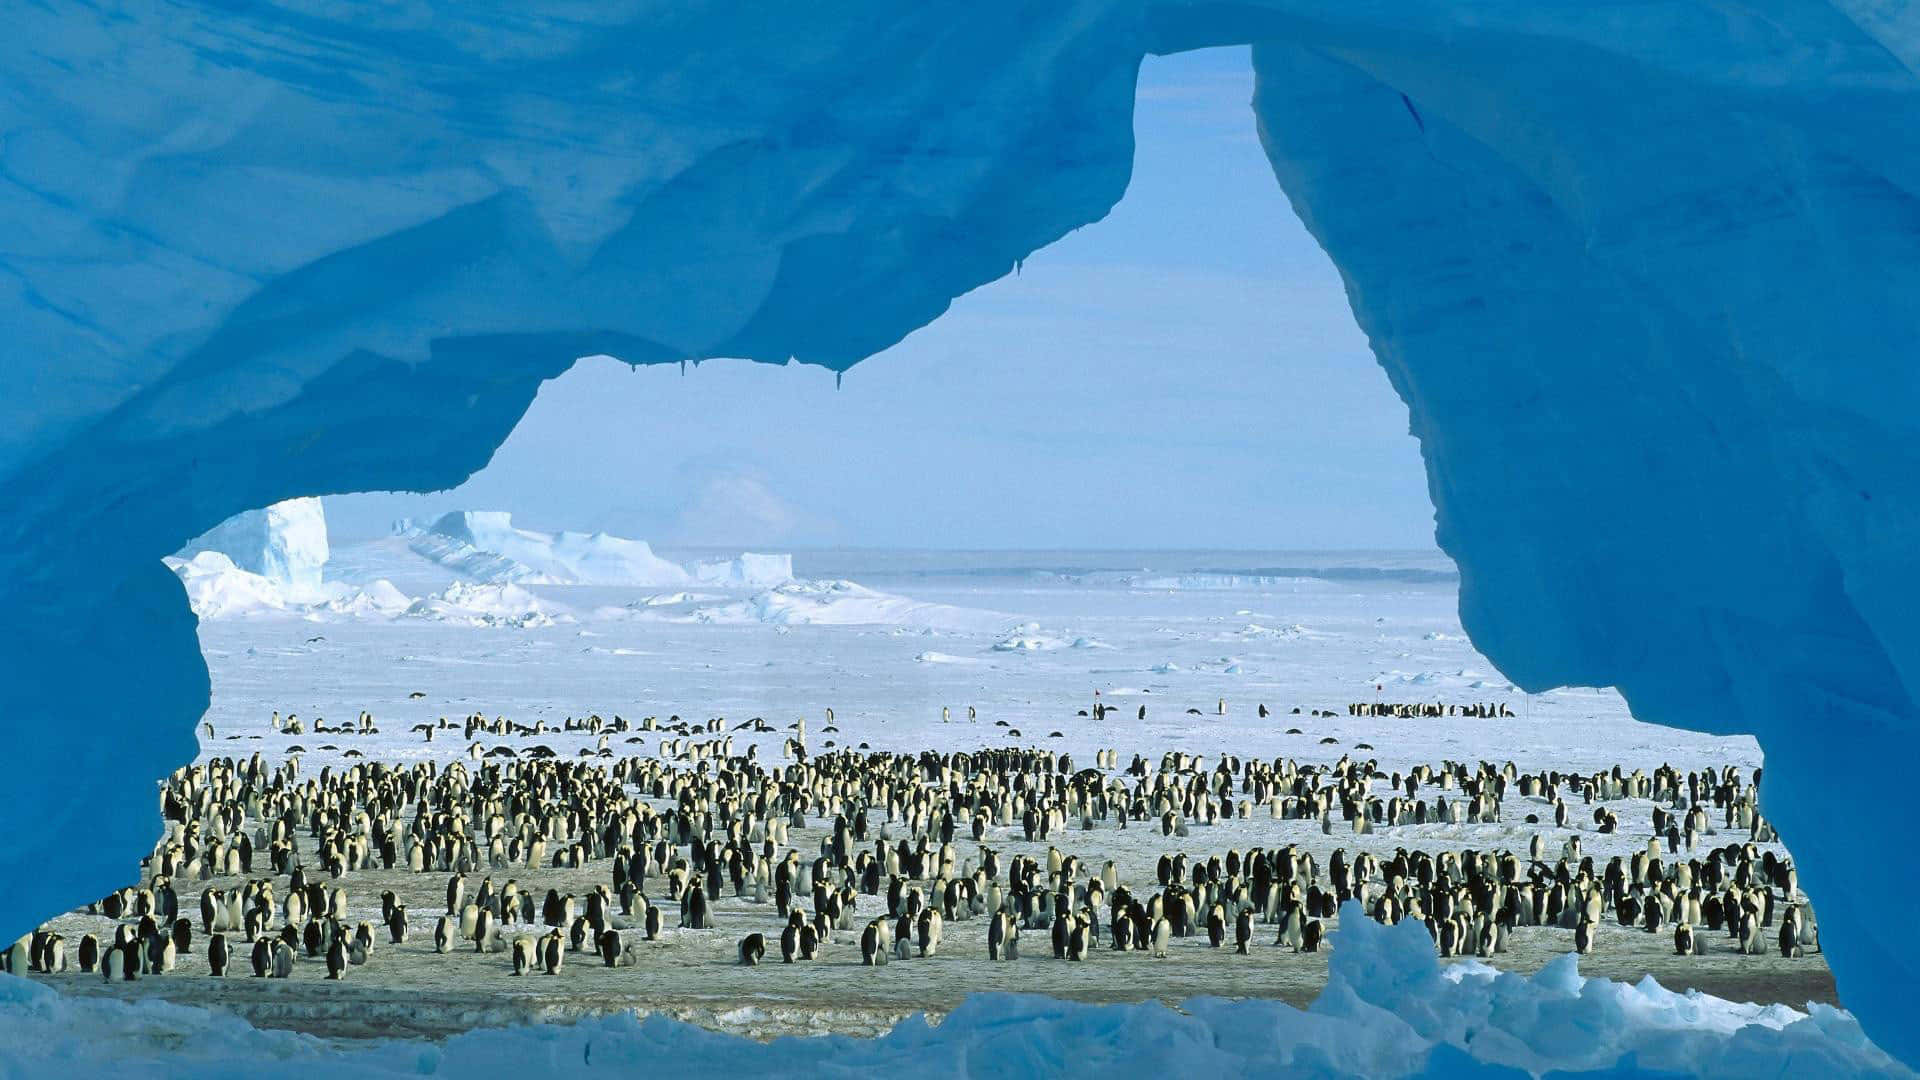 Step into a world of ice and solitude, at the South Pole of Antarctica